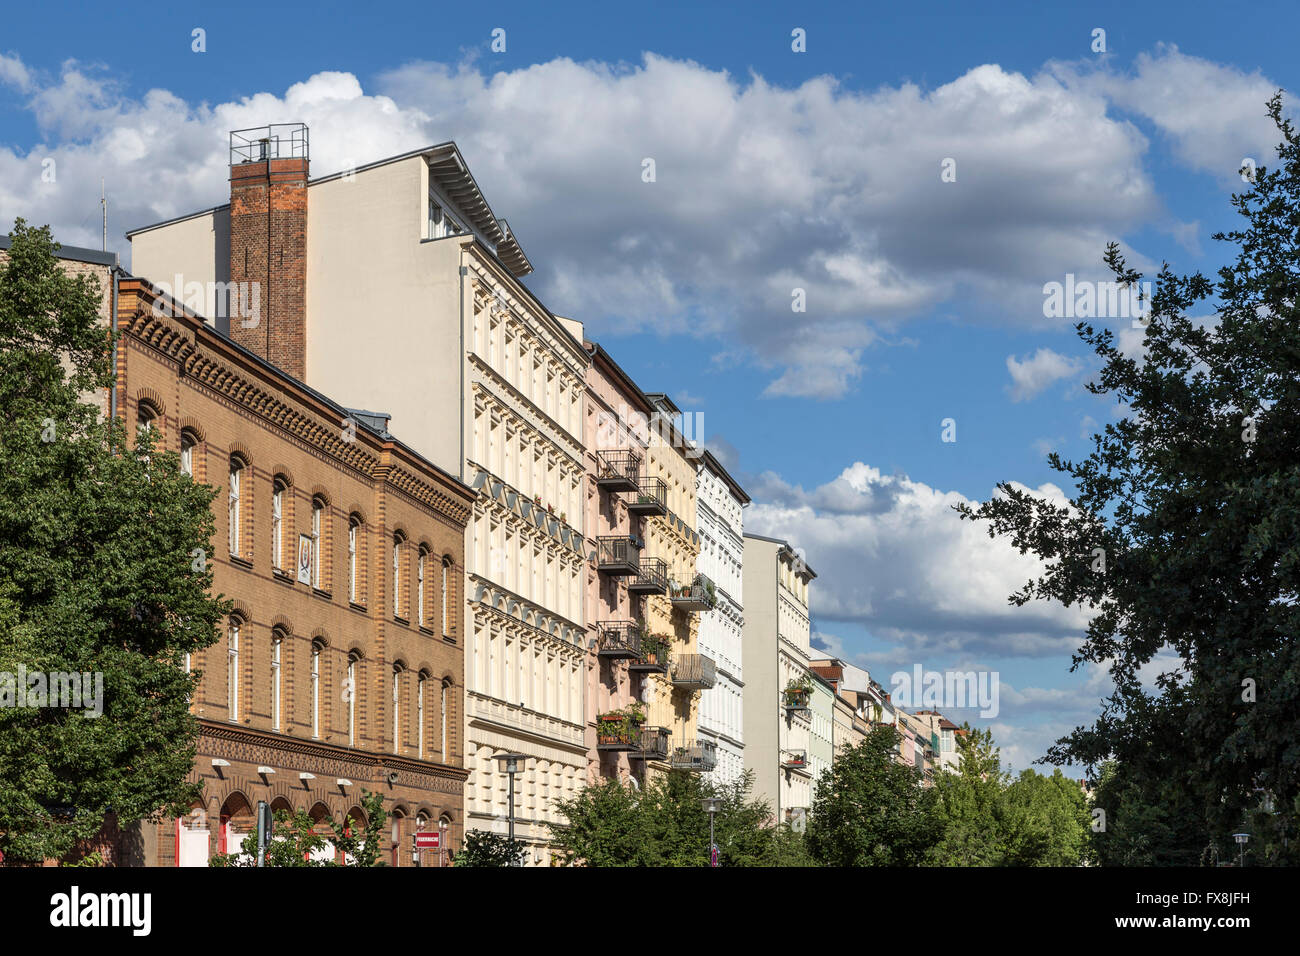 Oderberger Strasse, Fire Station, town houses, Clouds, Prenzlauer Berg, Berlin Stock Photo